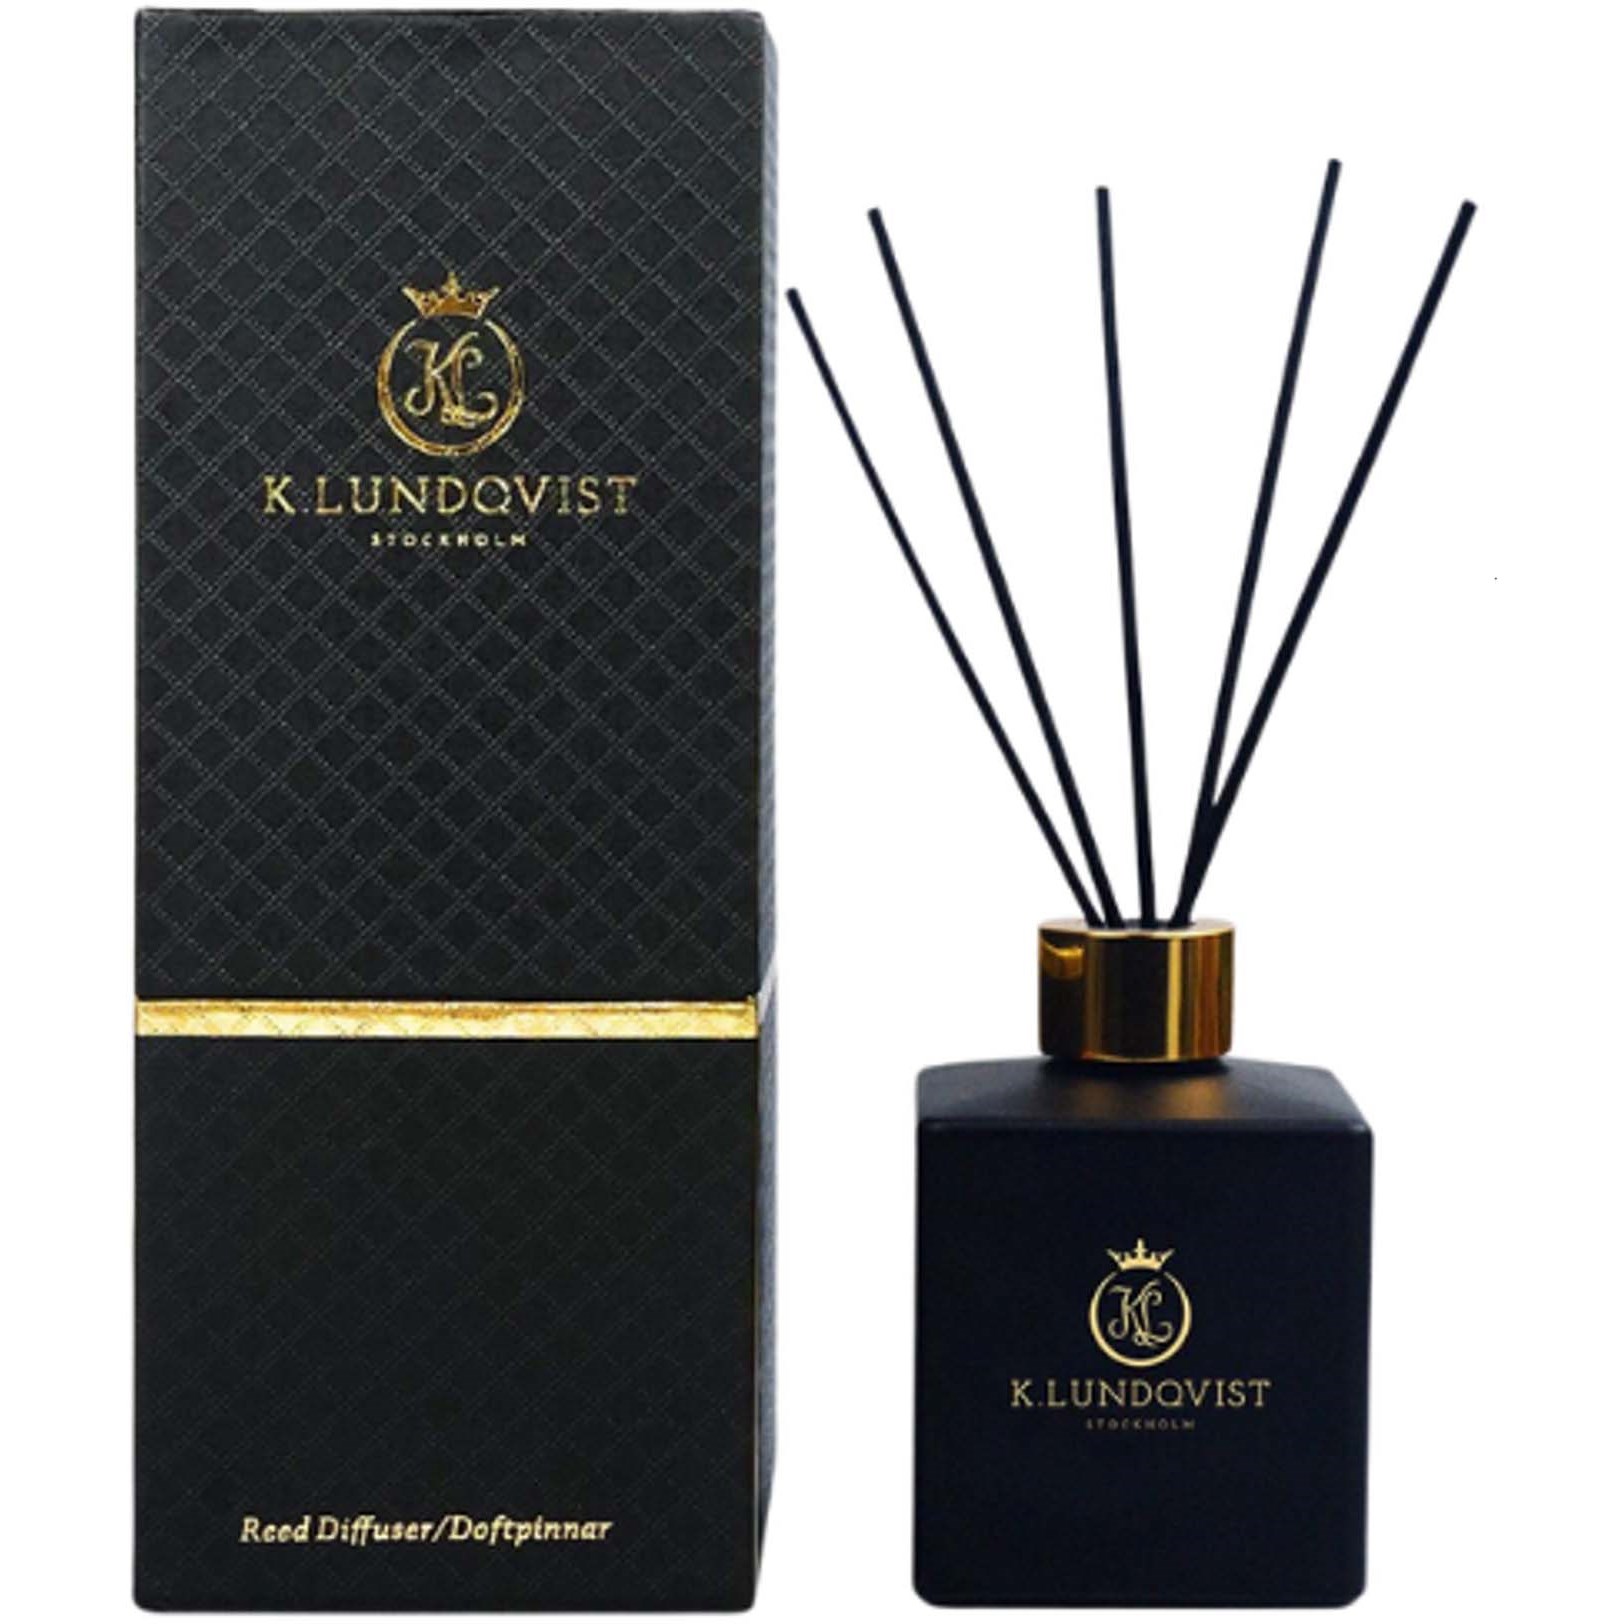 K. Lundqvist Stockholm Reed Diffuser Oud/ Musk & Oud 120 ml